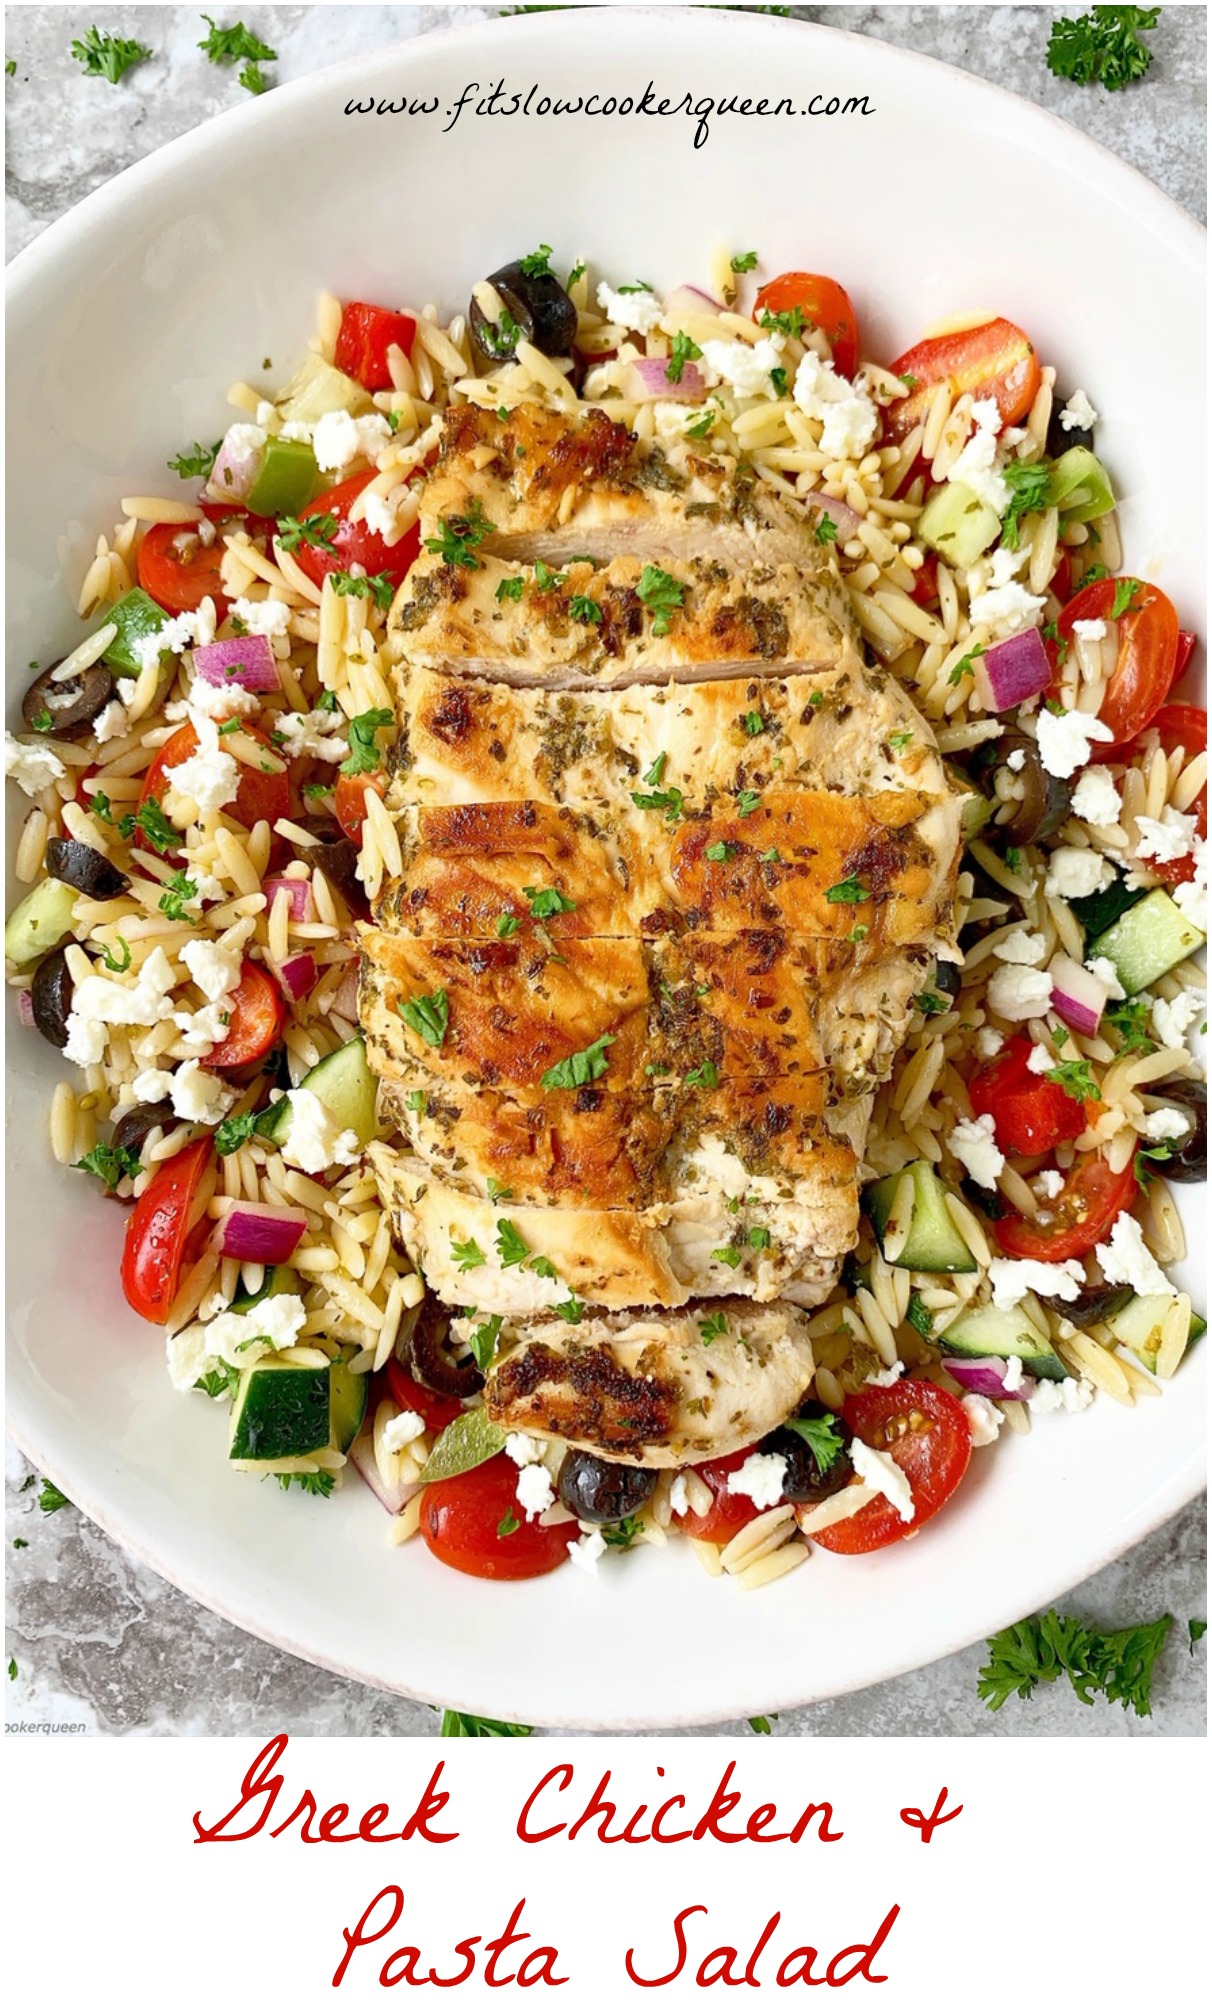 This Greek inspired chicken & pasta salad uses a single homemade dressing that's used for both the marinade and salad dressing. Make this in under 30 minutes.